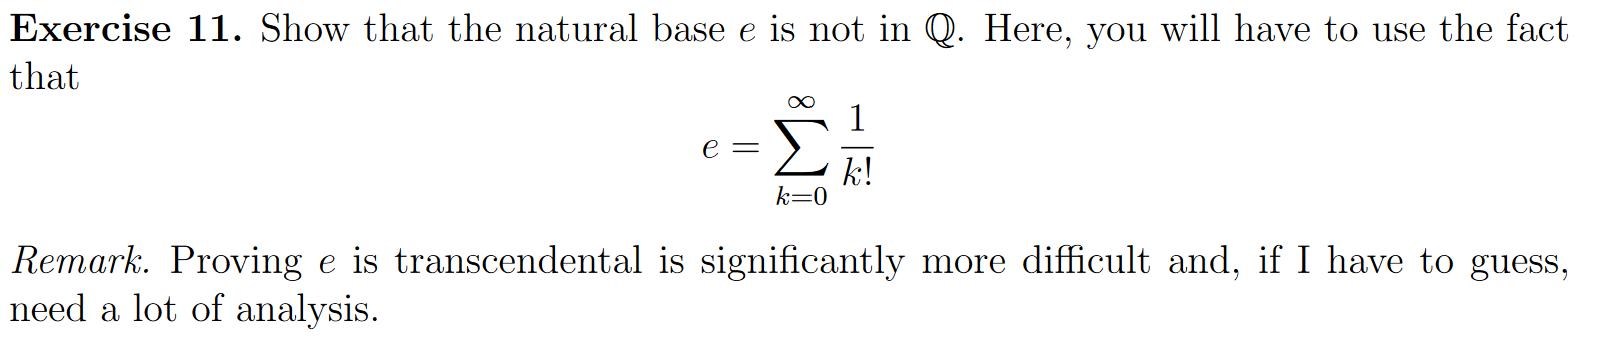 Exercise 11. Show that the natural base ( e ) is not in ( mathbb{Q} ). Here, you will have to use the fact that [ e=su